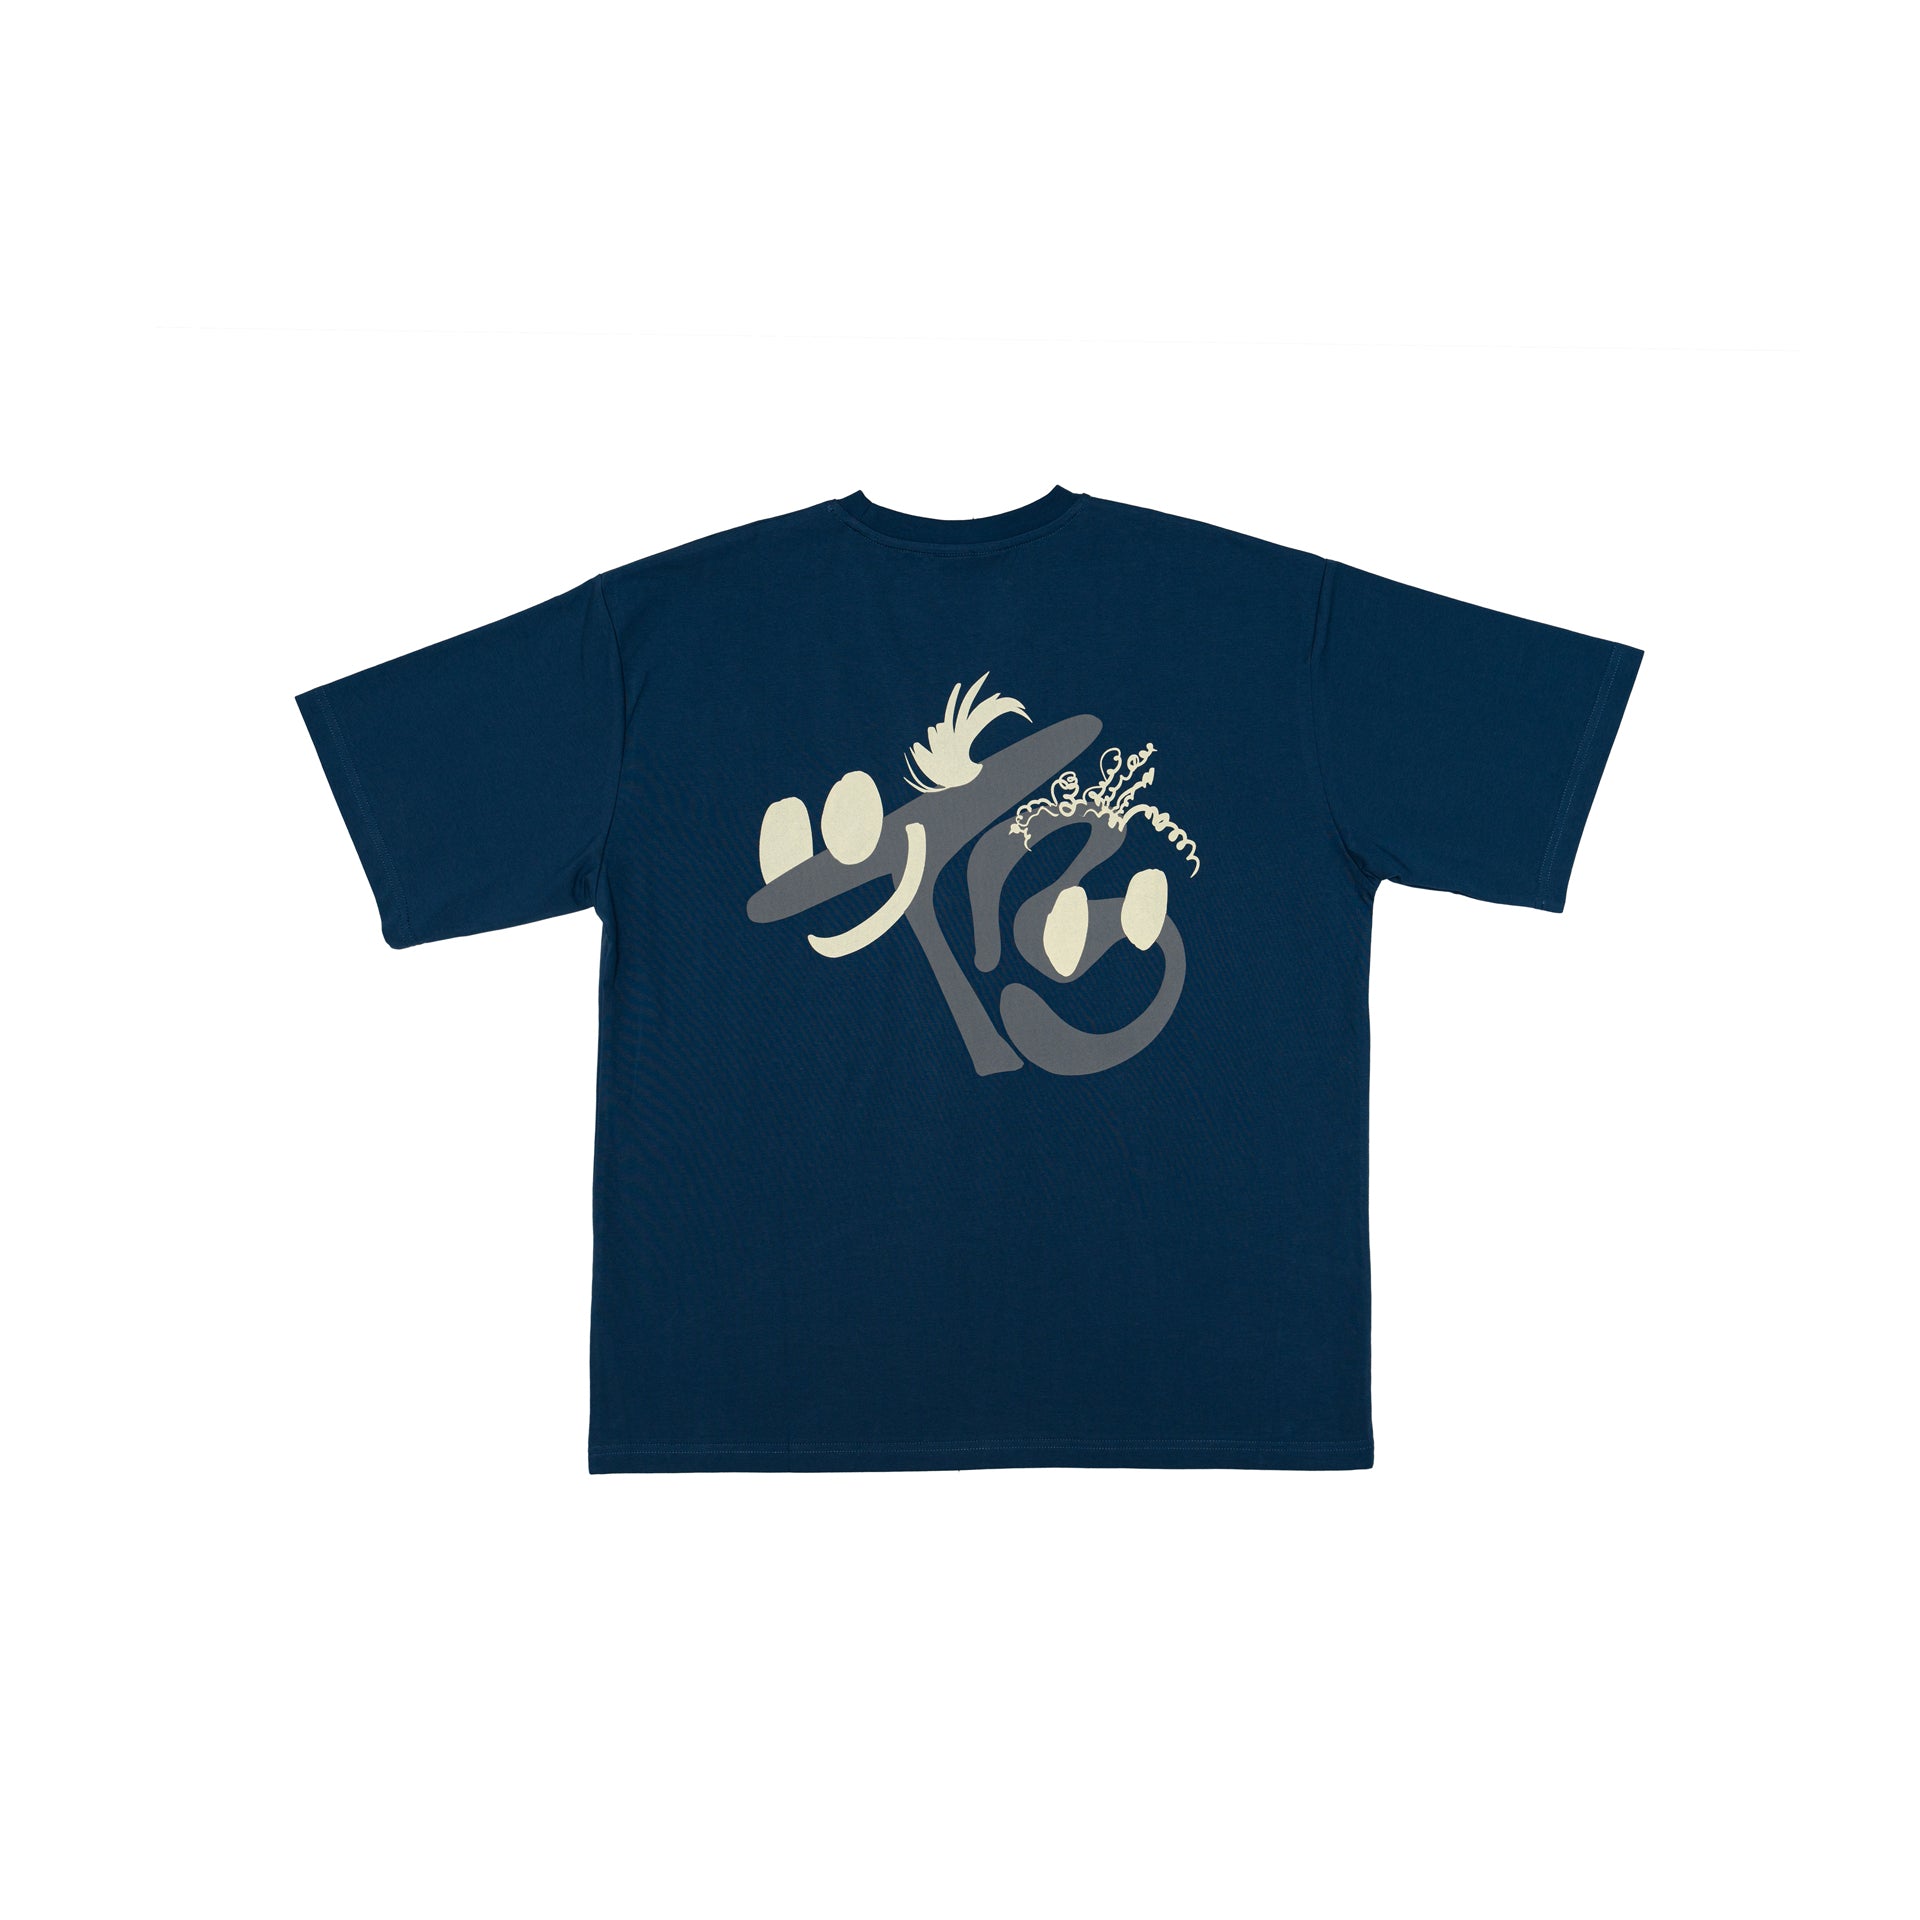 Navy T-shirt "Faces" by Brandtionary